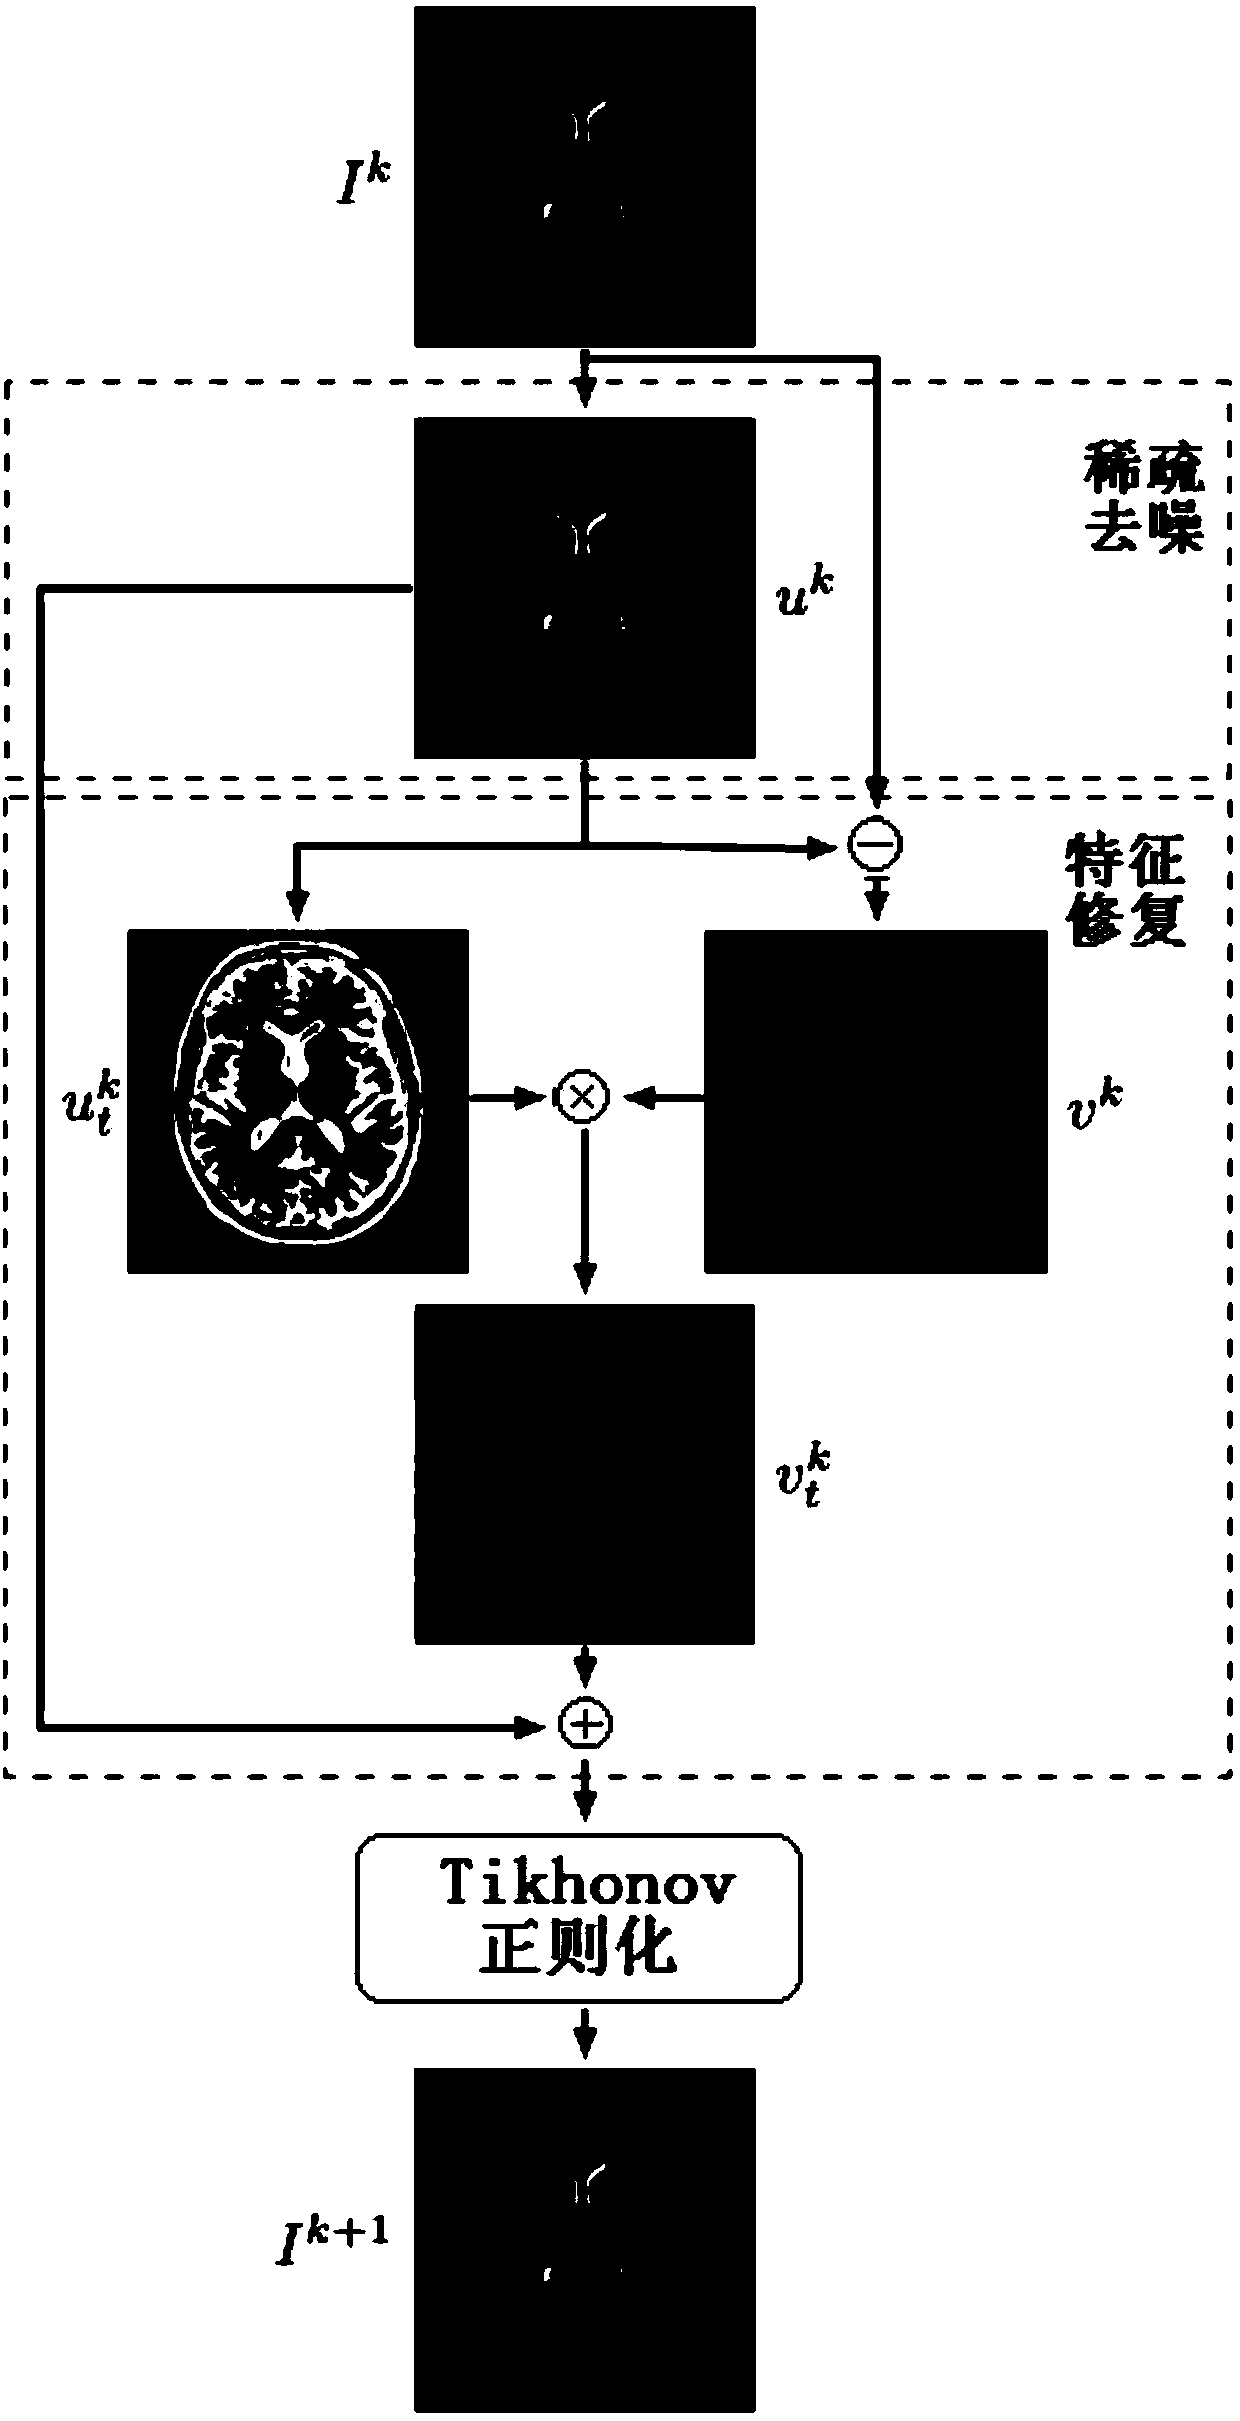 A magnetic-resonance fast imaging method and system based on iterative feature correction